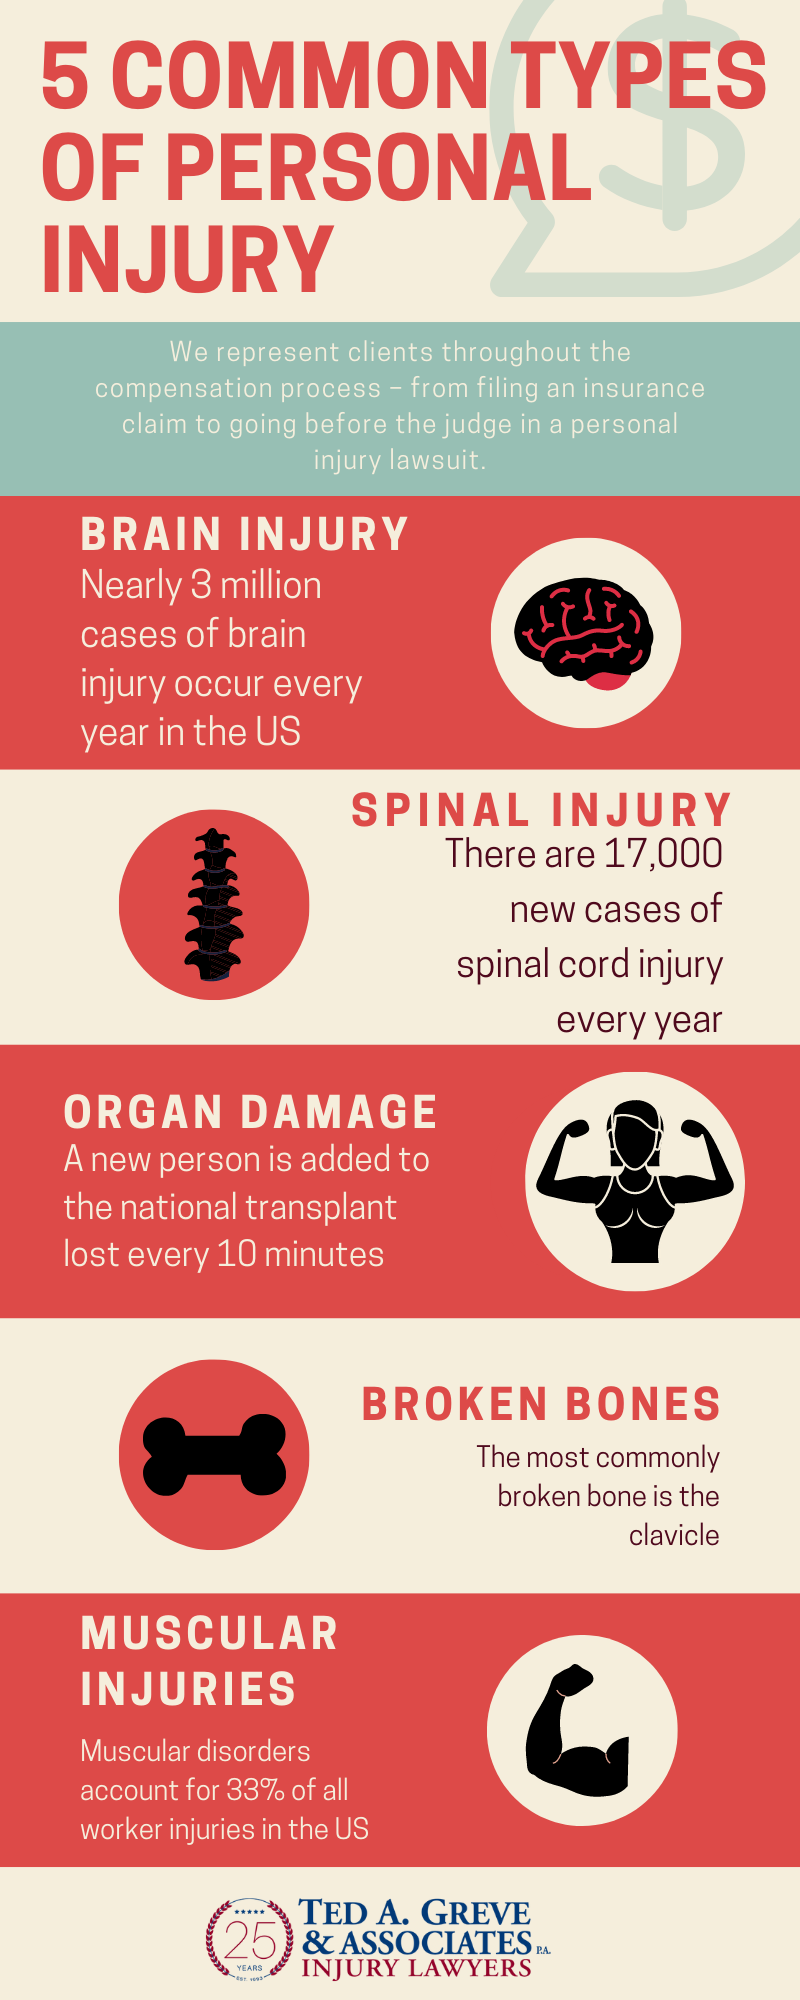 Ted Greve Atlanta Personal Injury Infographic